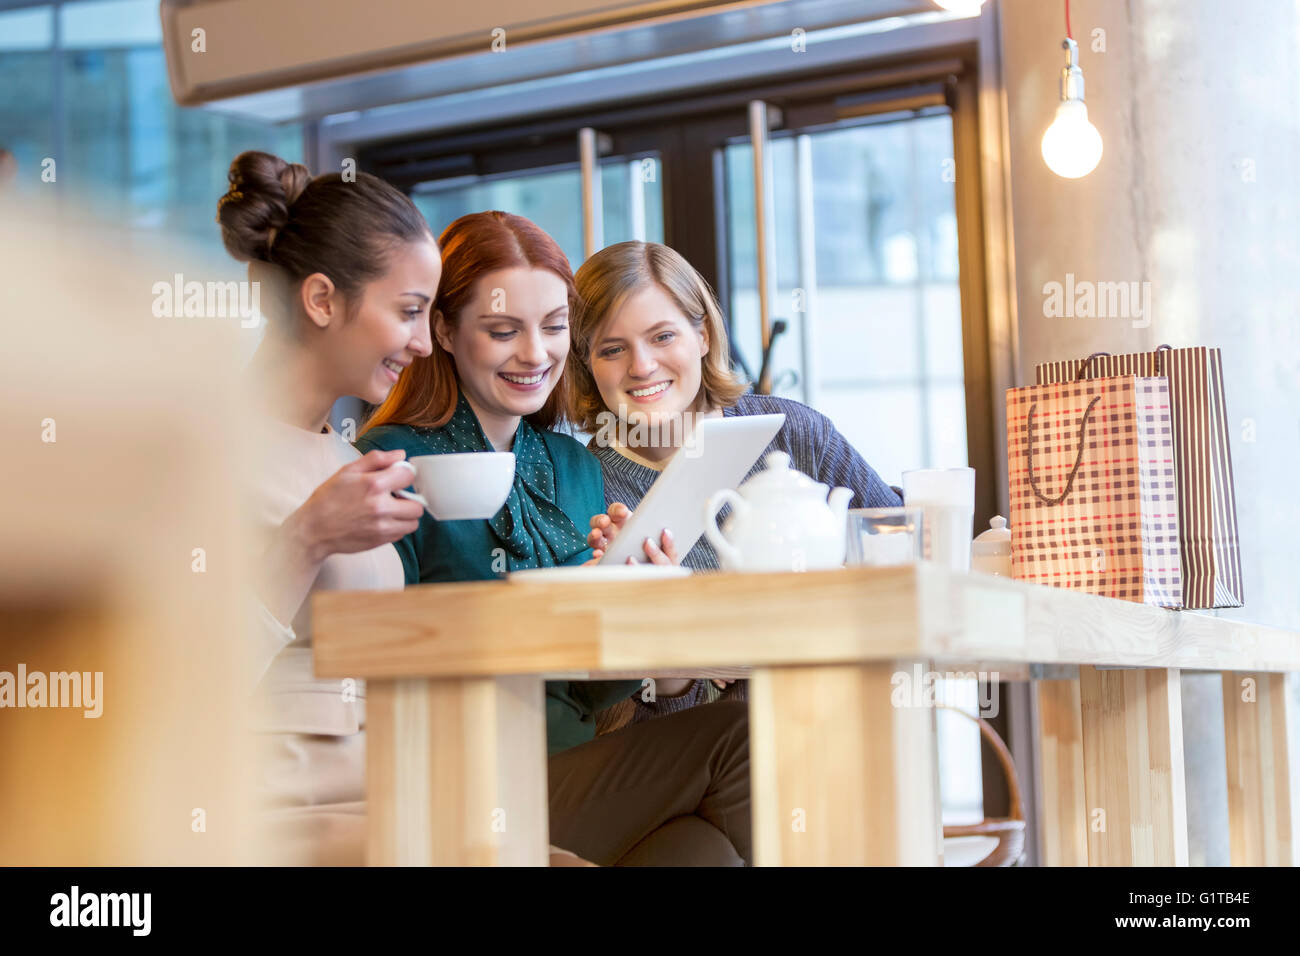 Smiling women drinking tea and sharing digital tablet at cafe counter Stock Photo